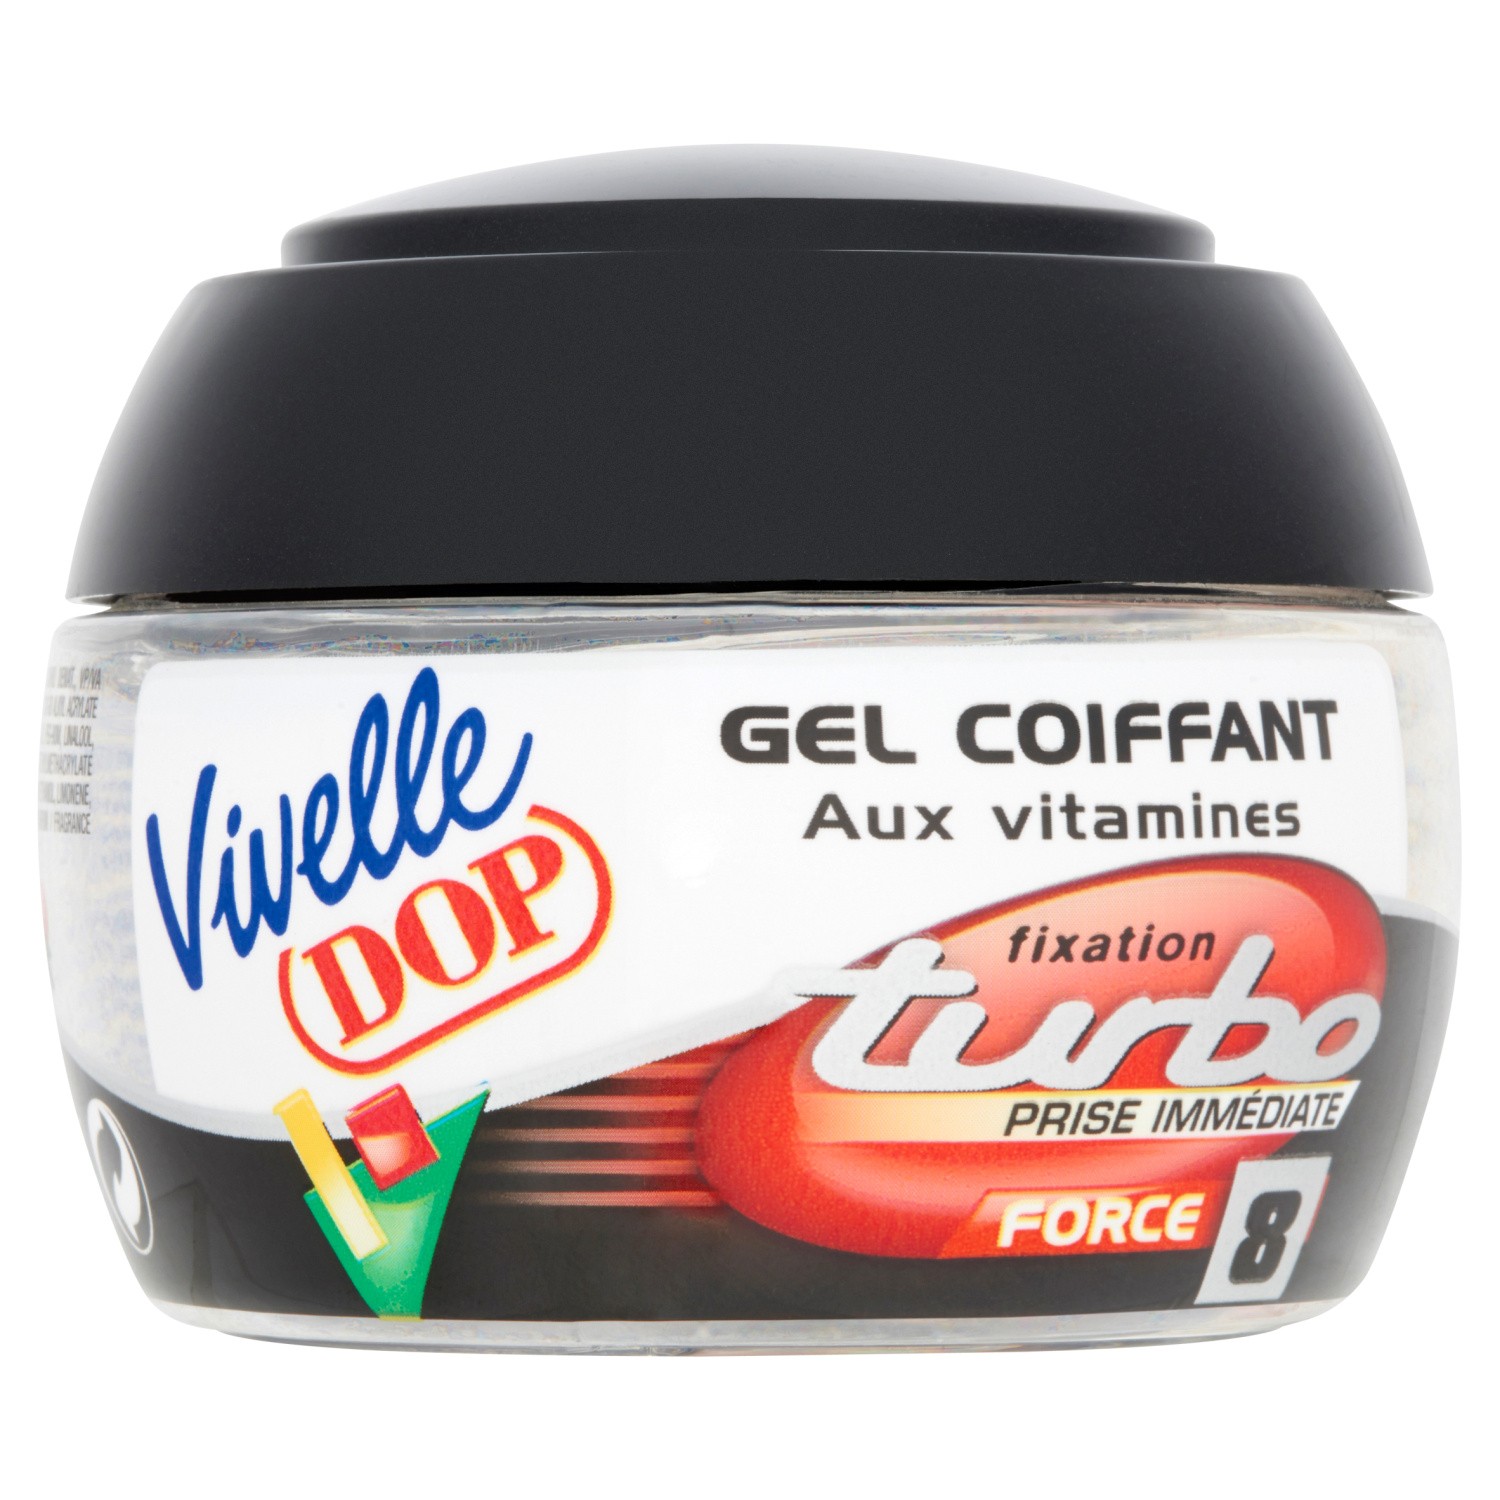 Gel coiffant fixation turbo Force 8